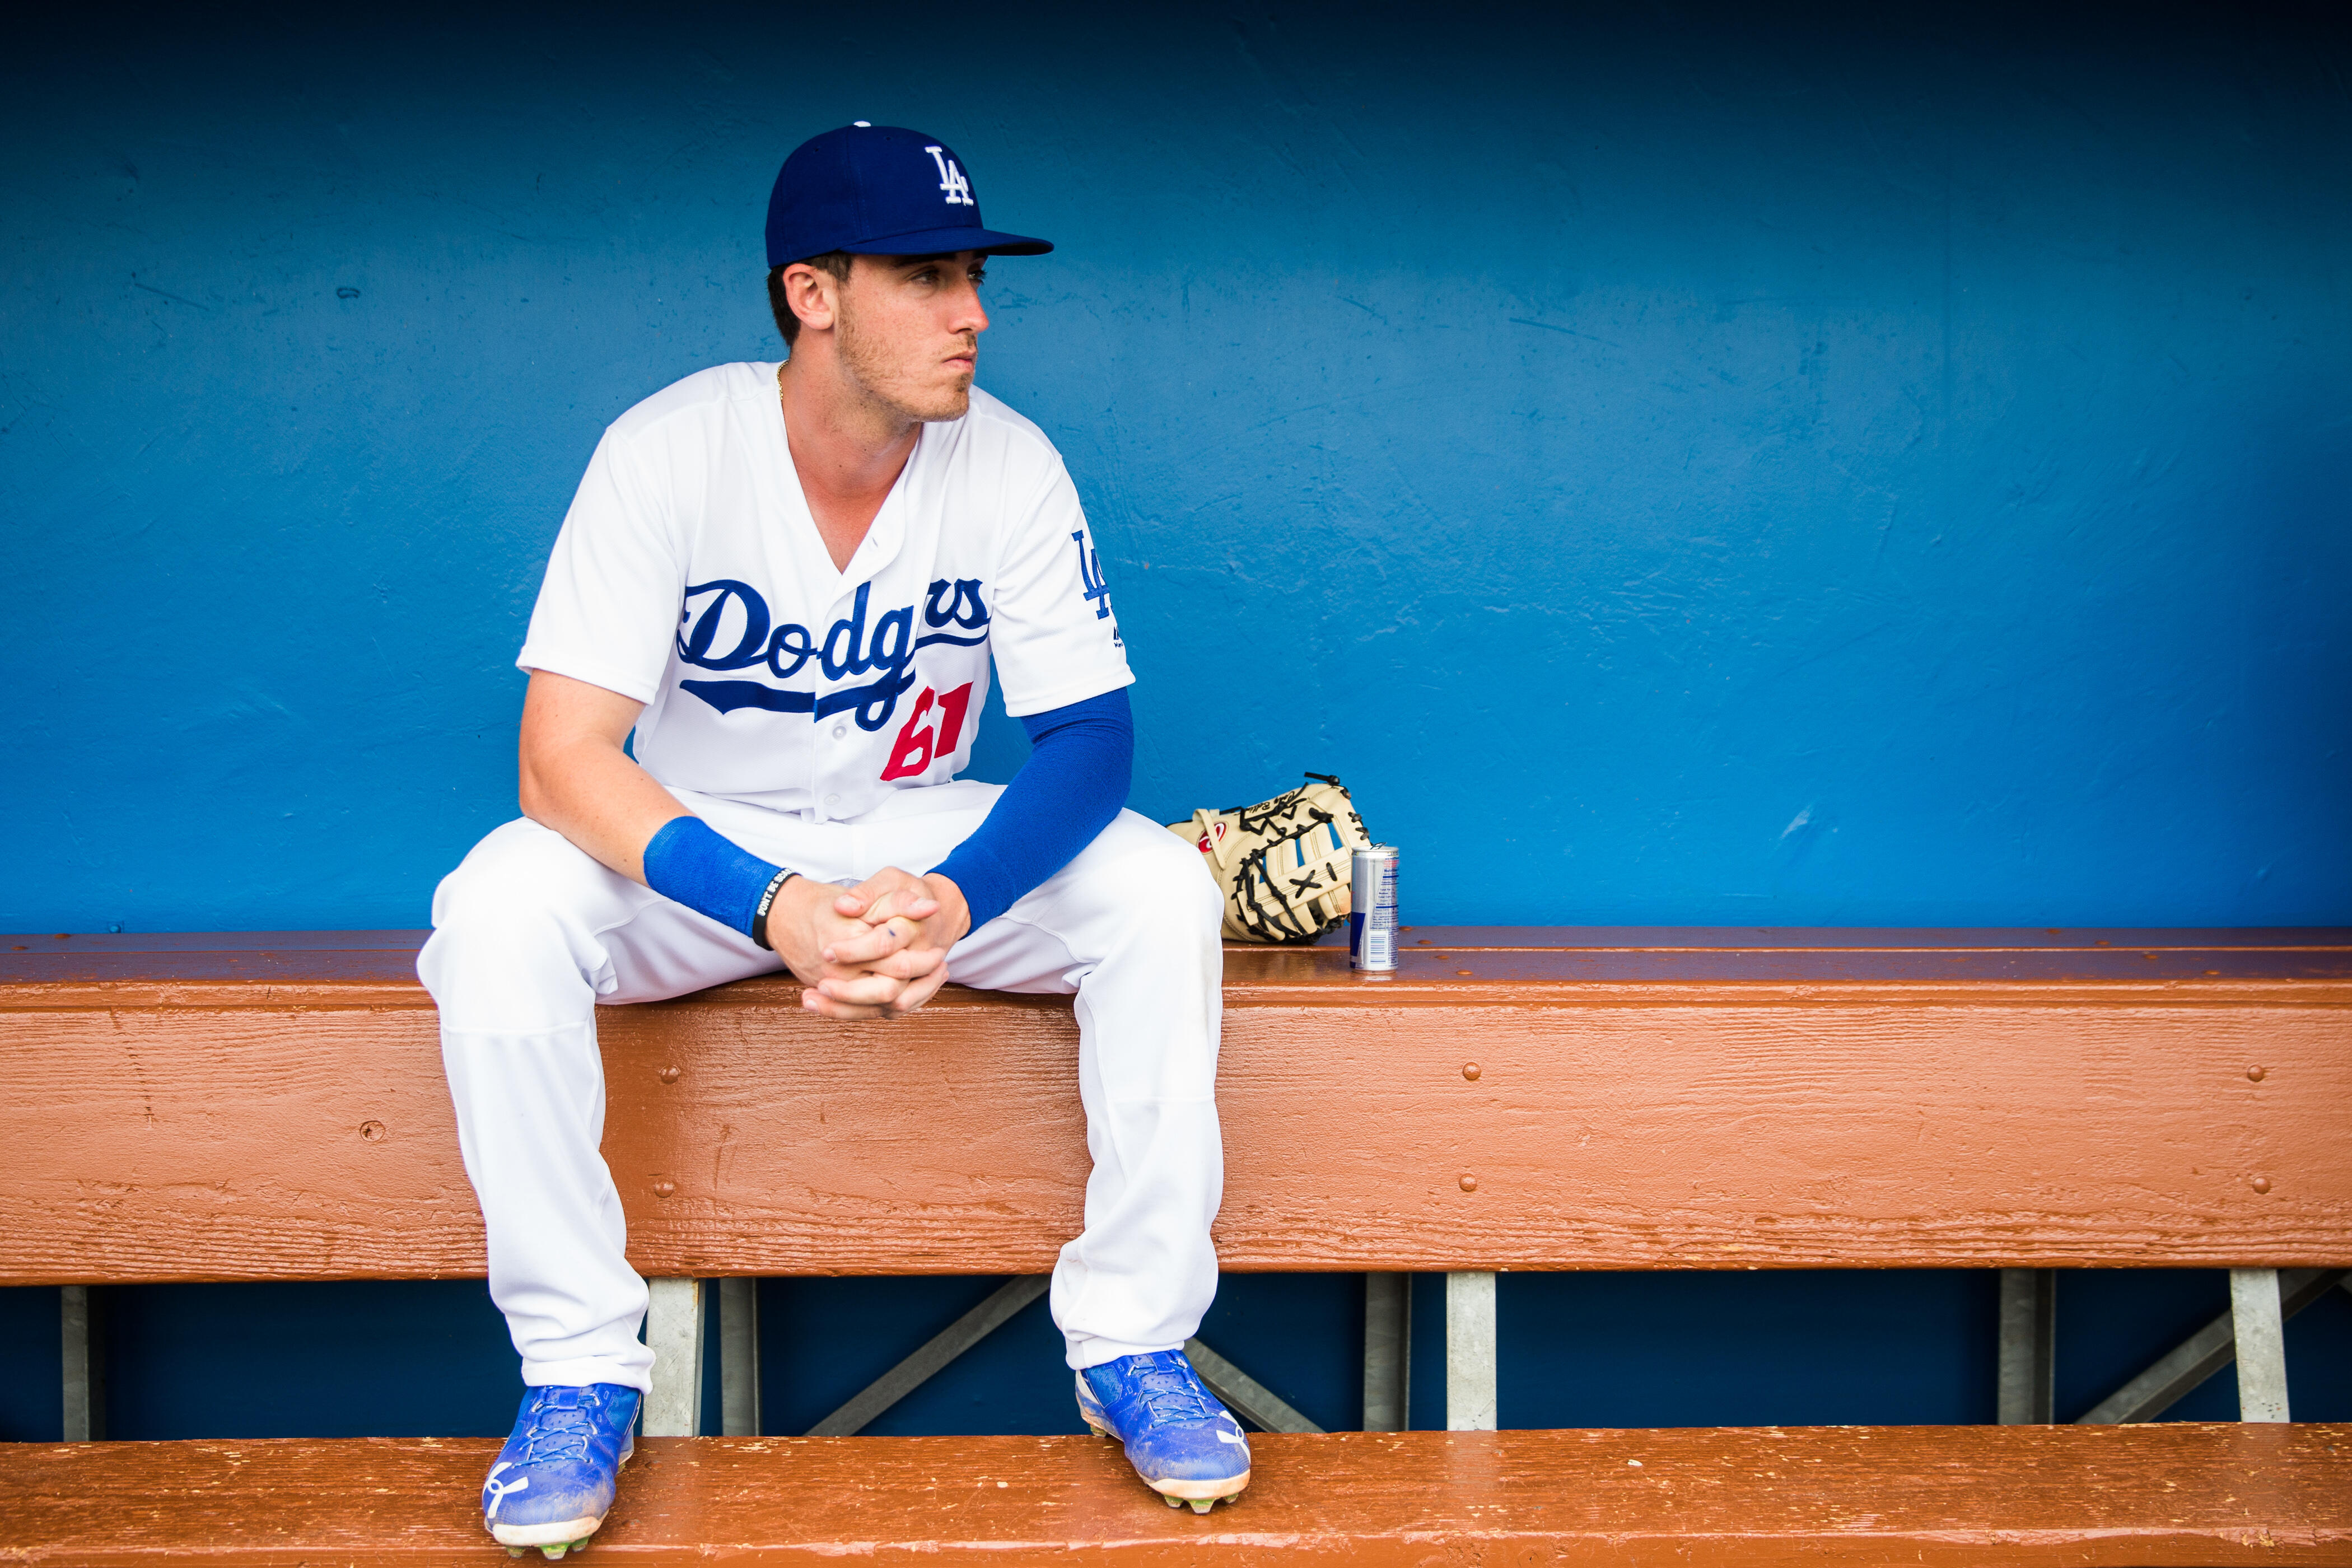 GLENDALE, AZ - FEBRUARY 27:  Cody Bellinger #61 of the Los Angeles Dodgers sits in the dugout before a spring training game against the Colorado Rockies at Camelback Ranch on February 27, 2017 in Glendale, Arizona. (Photo by Rob Tringali/Getty Images)